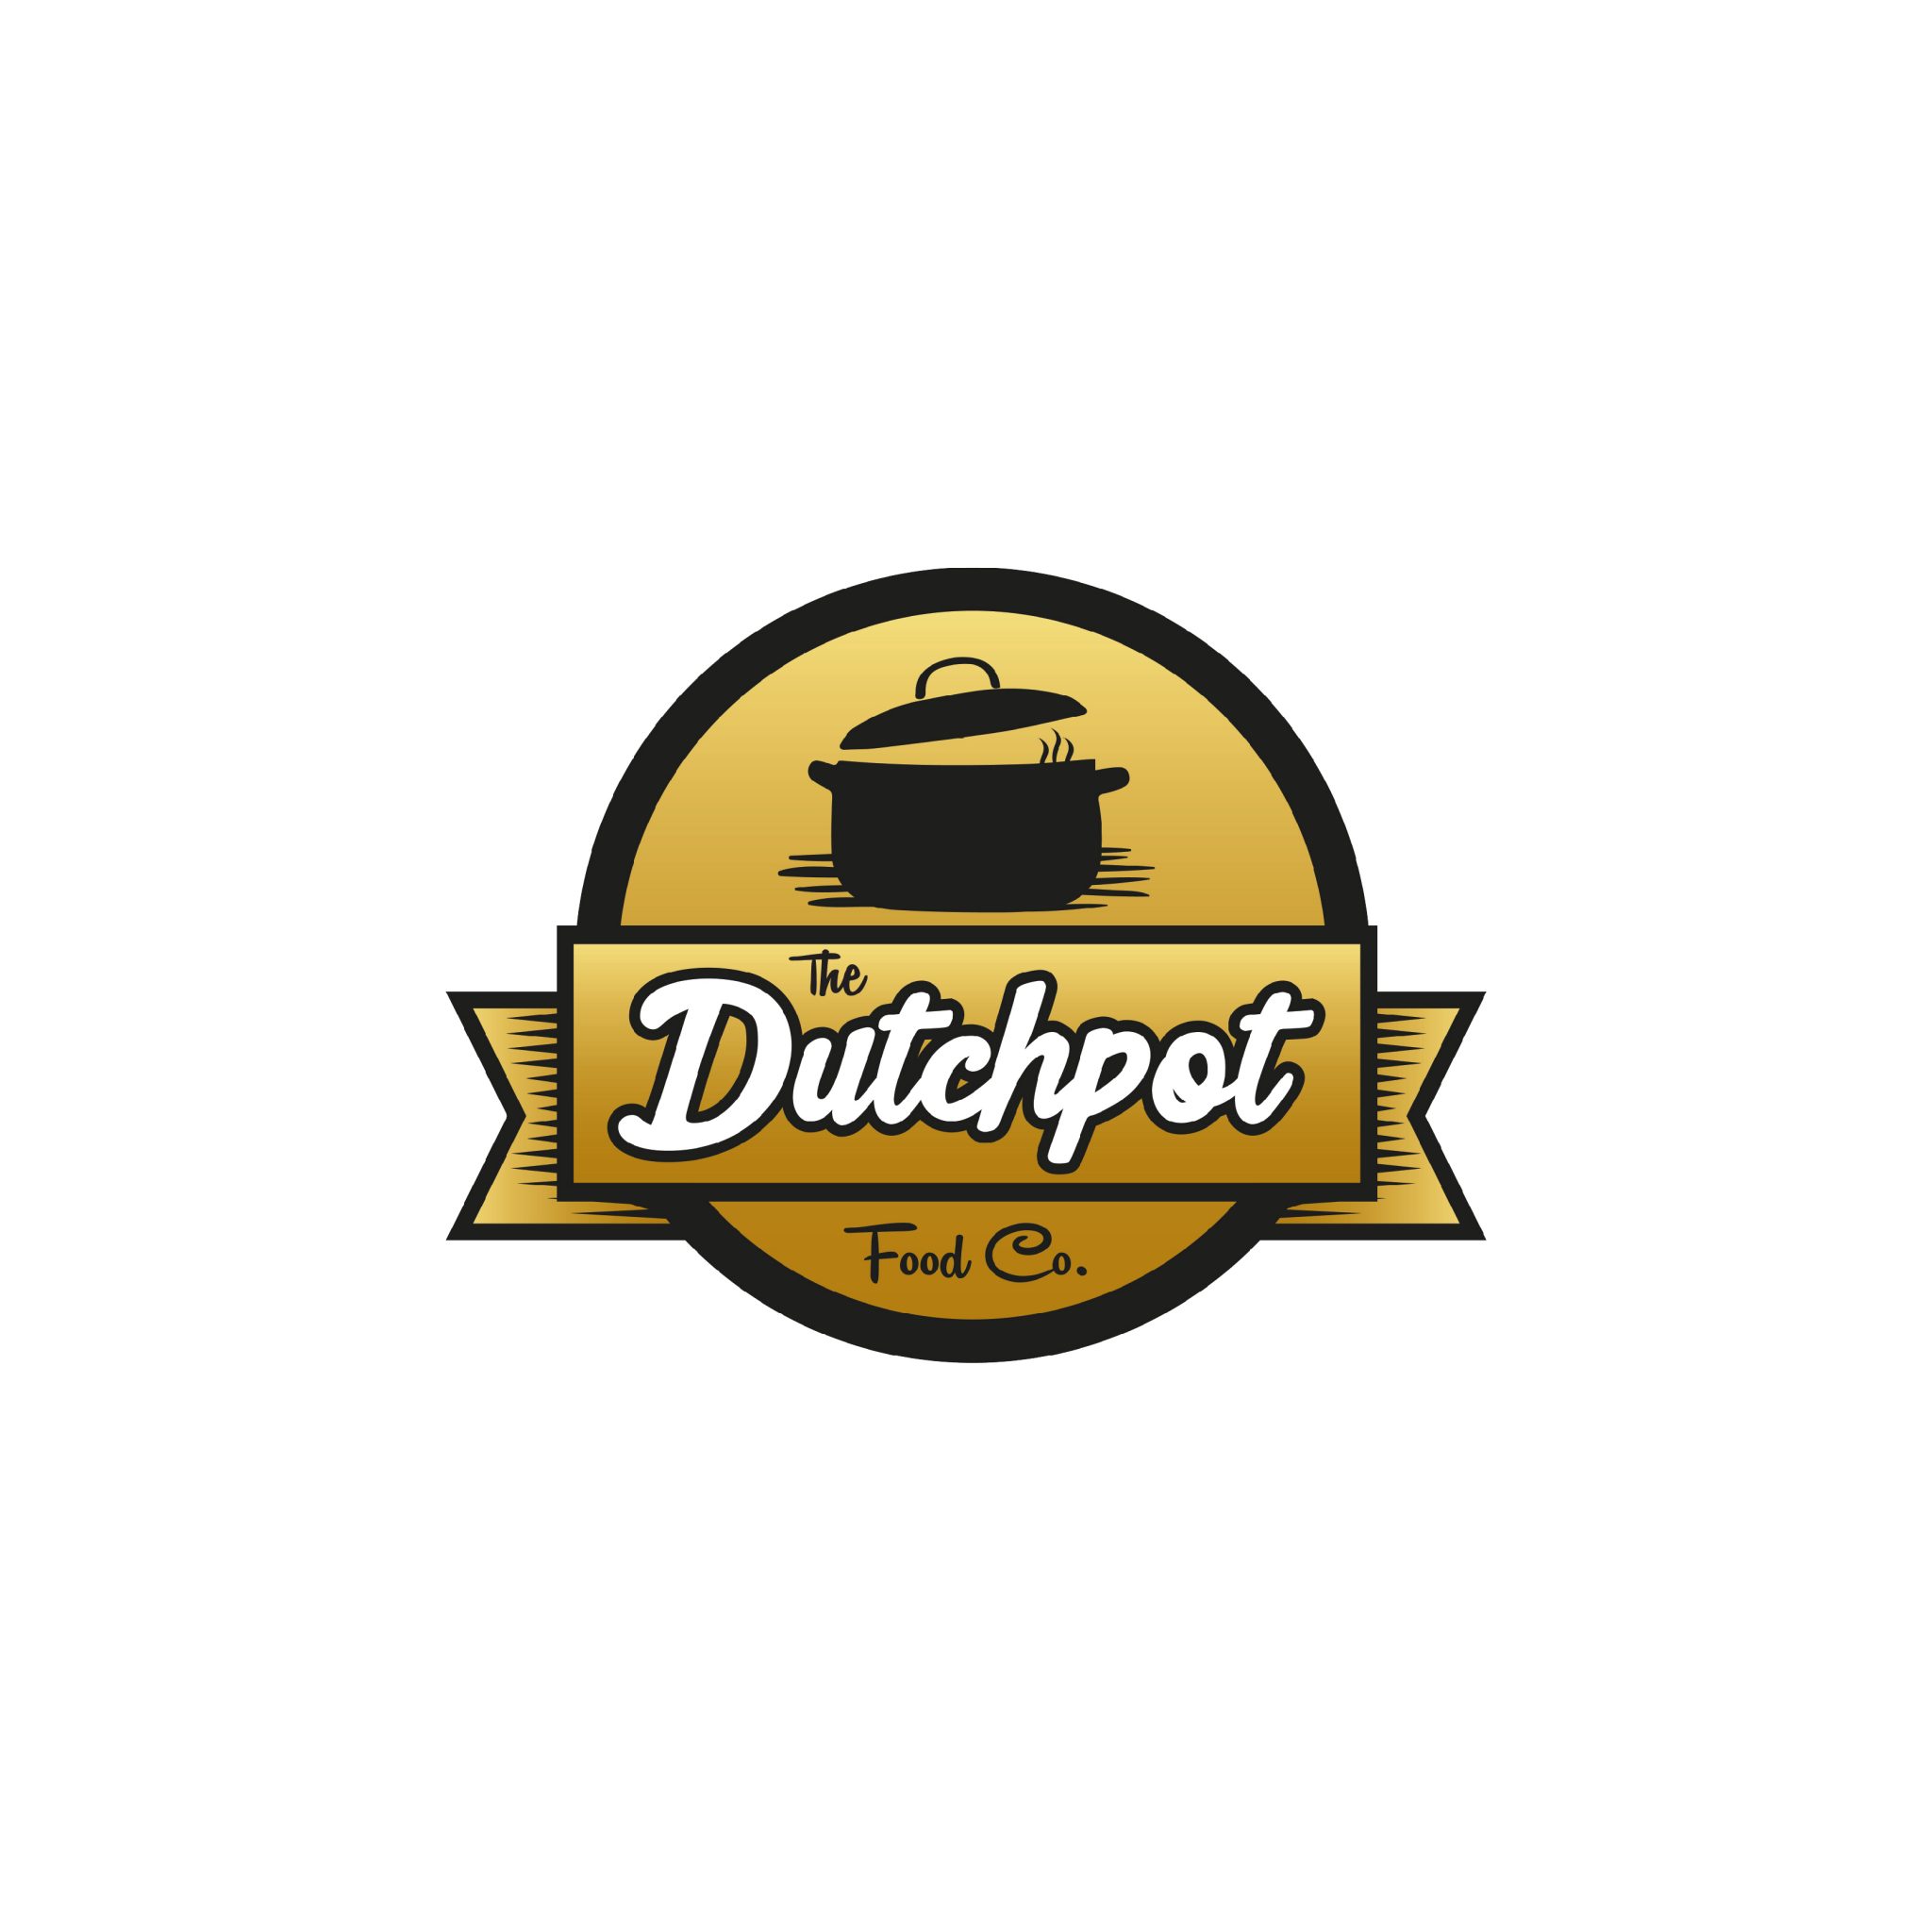 The Dutchpot Food Co